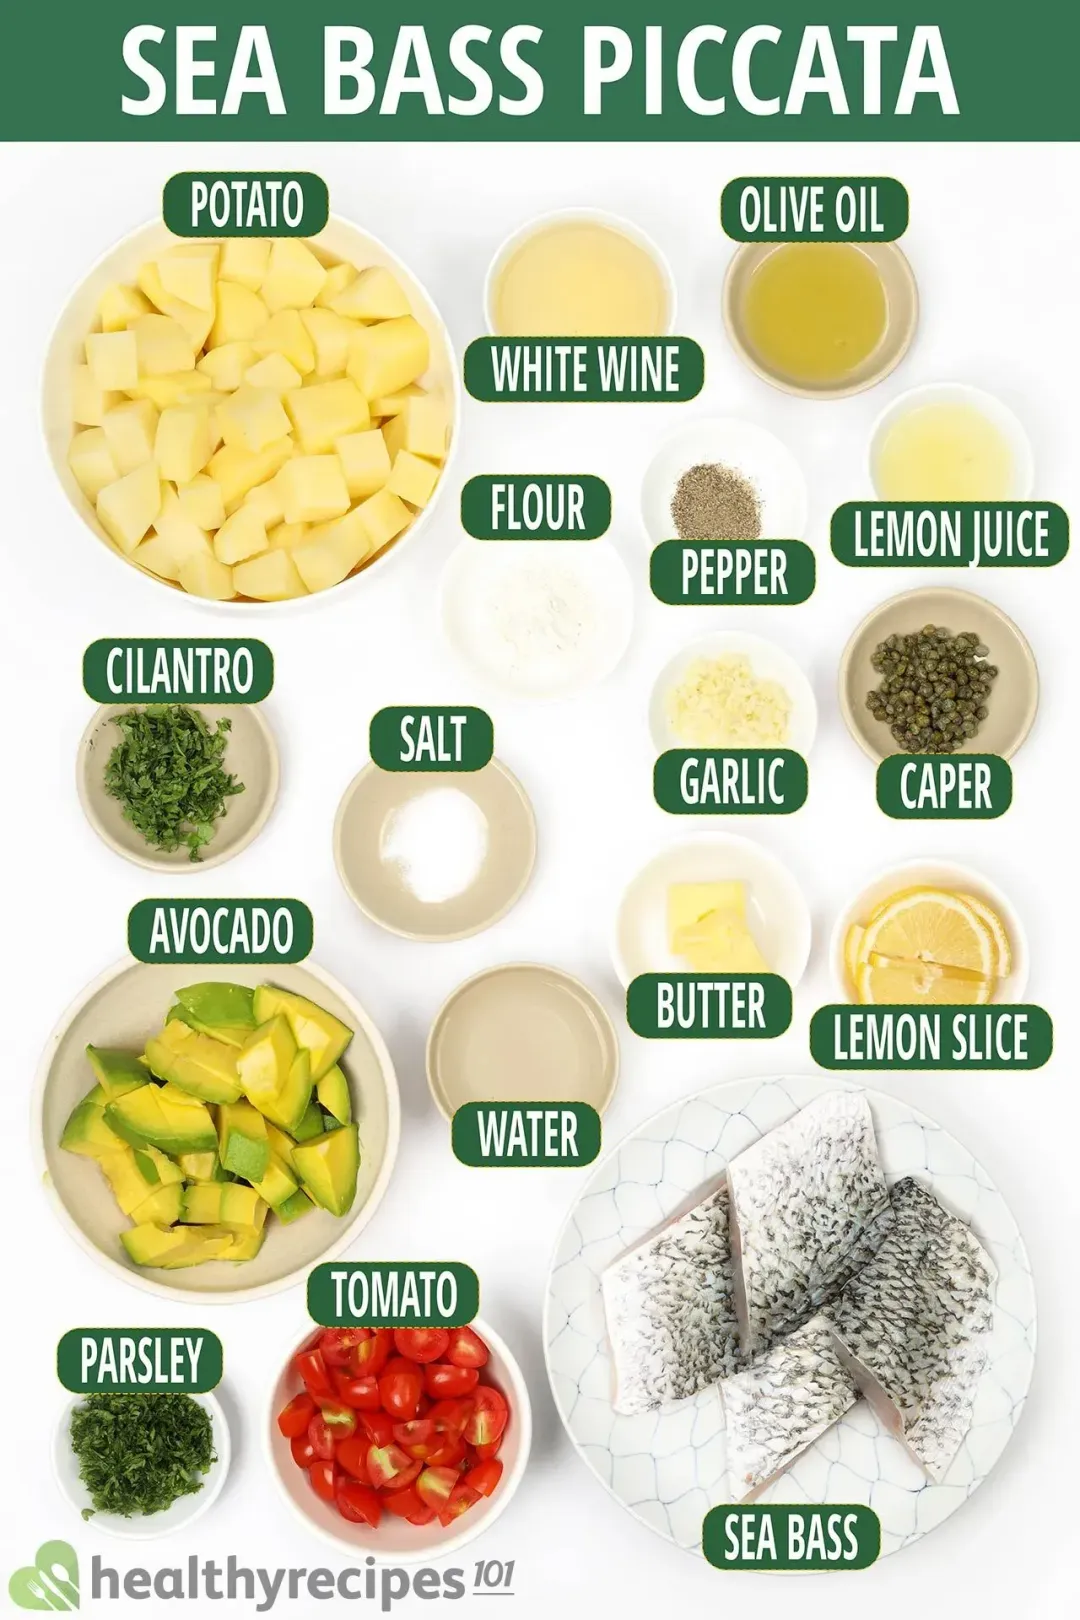 Ingredients for Sea Bass Piccata